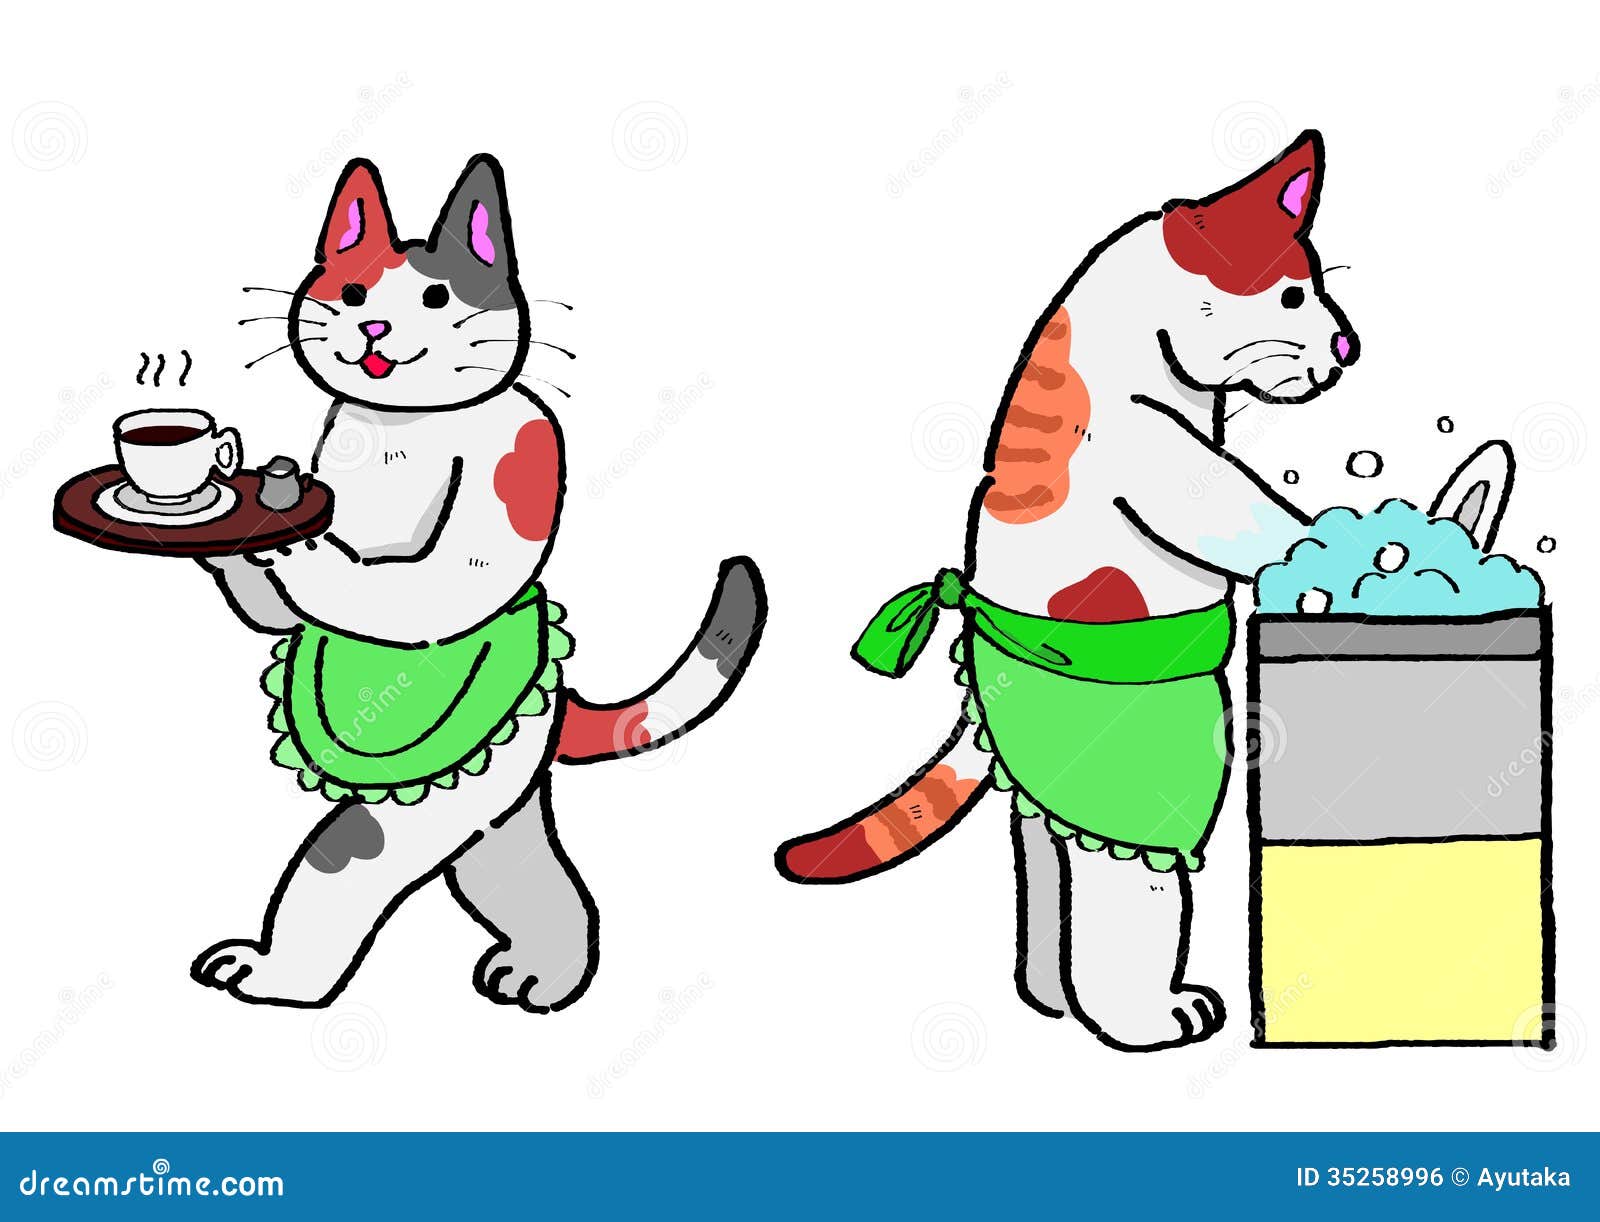  Cats  Serving Coffee washing  Dishes  Royalty Free Stock 